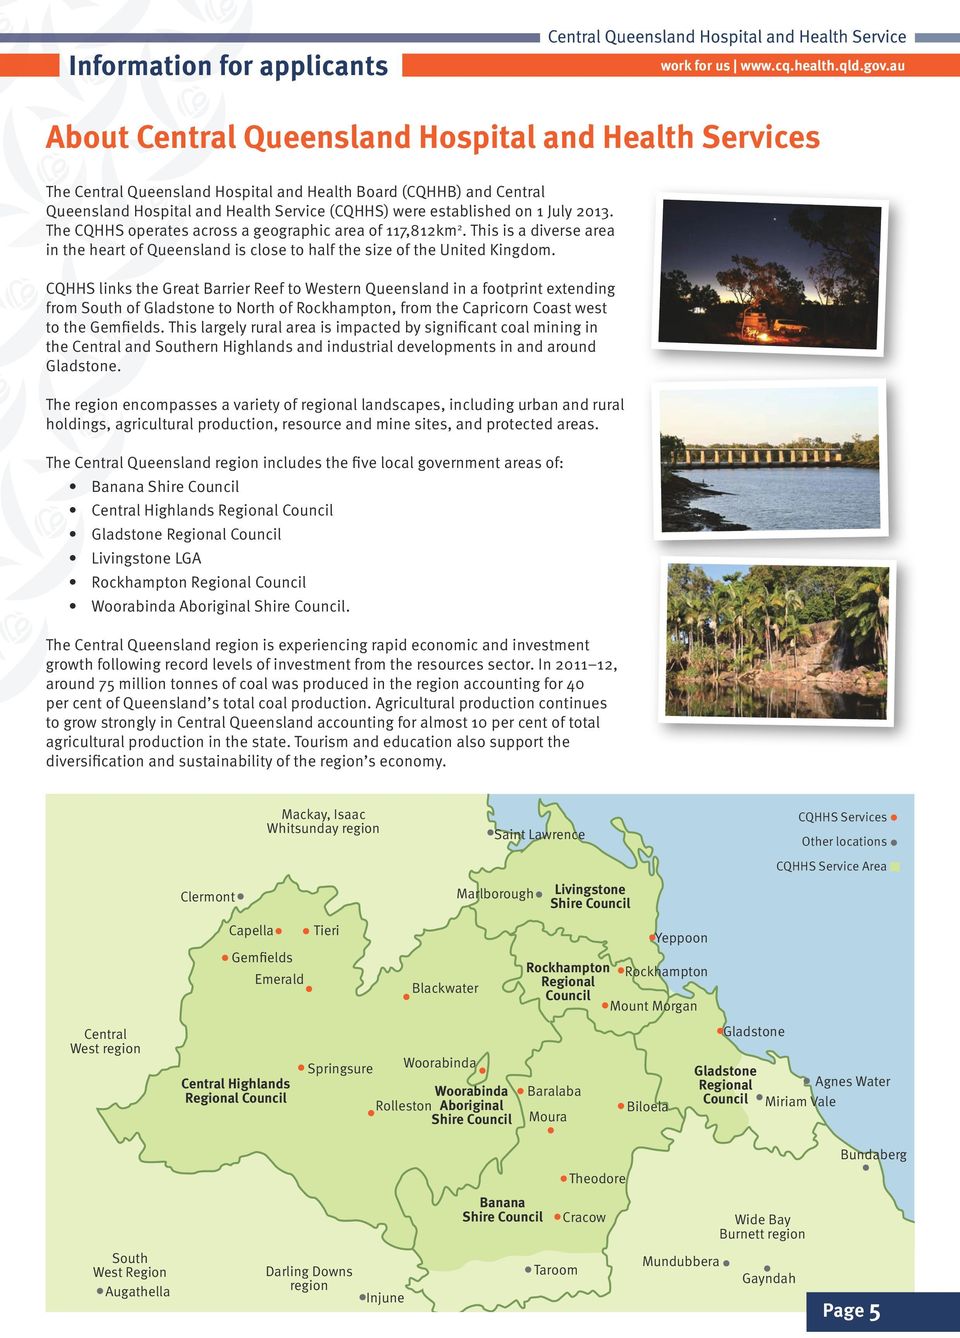 CQHHS links the Great Barrier Reef to Western Queensland in a footprint extending from South of Gladstone to North of Rockhampton, from the Capricorn Coast west to the Gemfields.